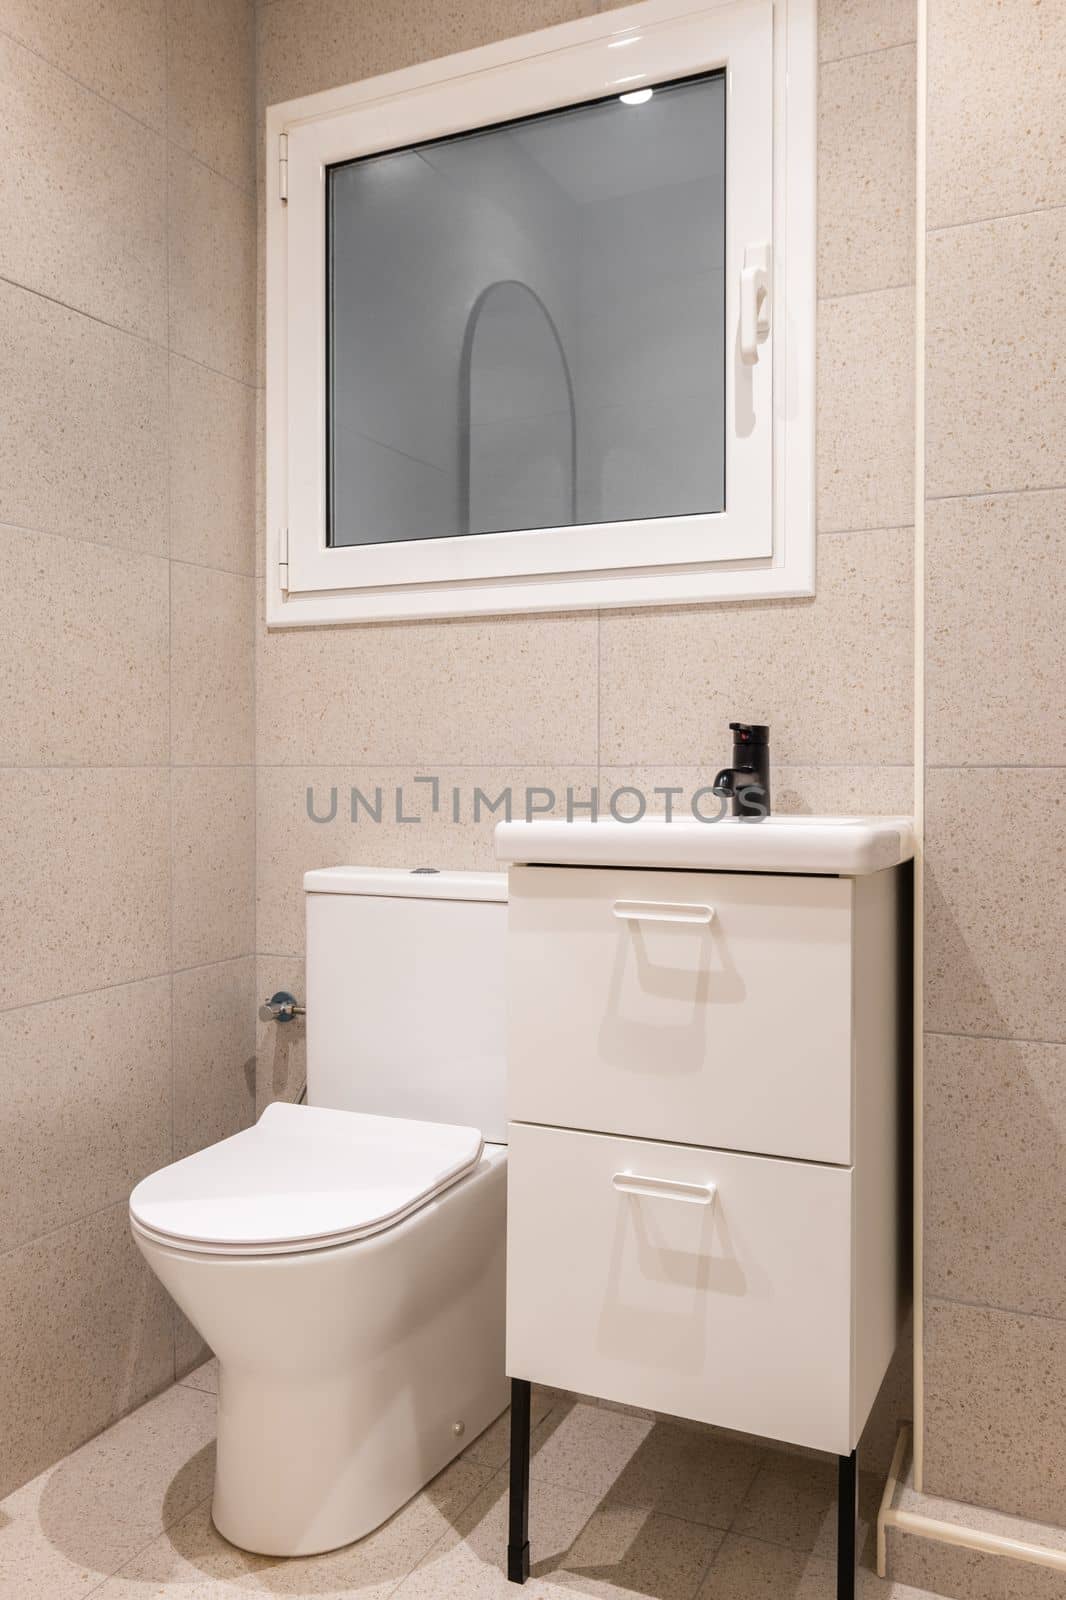 Part of bathroom with toilet bowl, washbasin on wooden furniture and beige tiled walls.